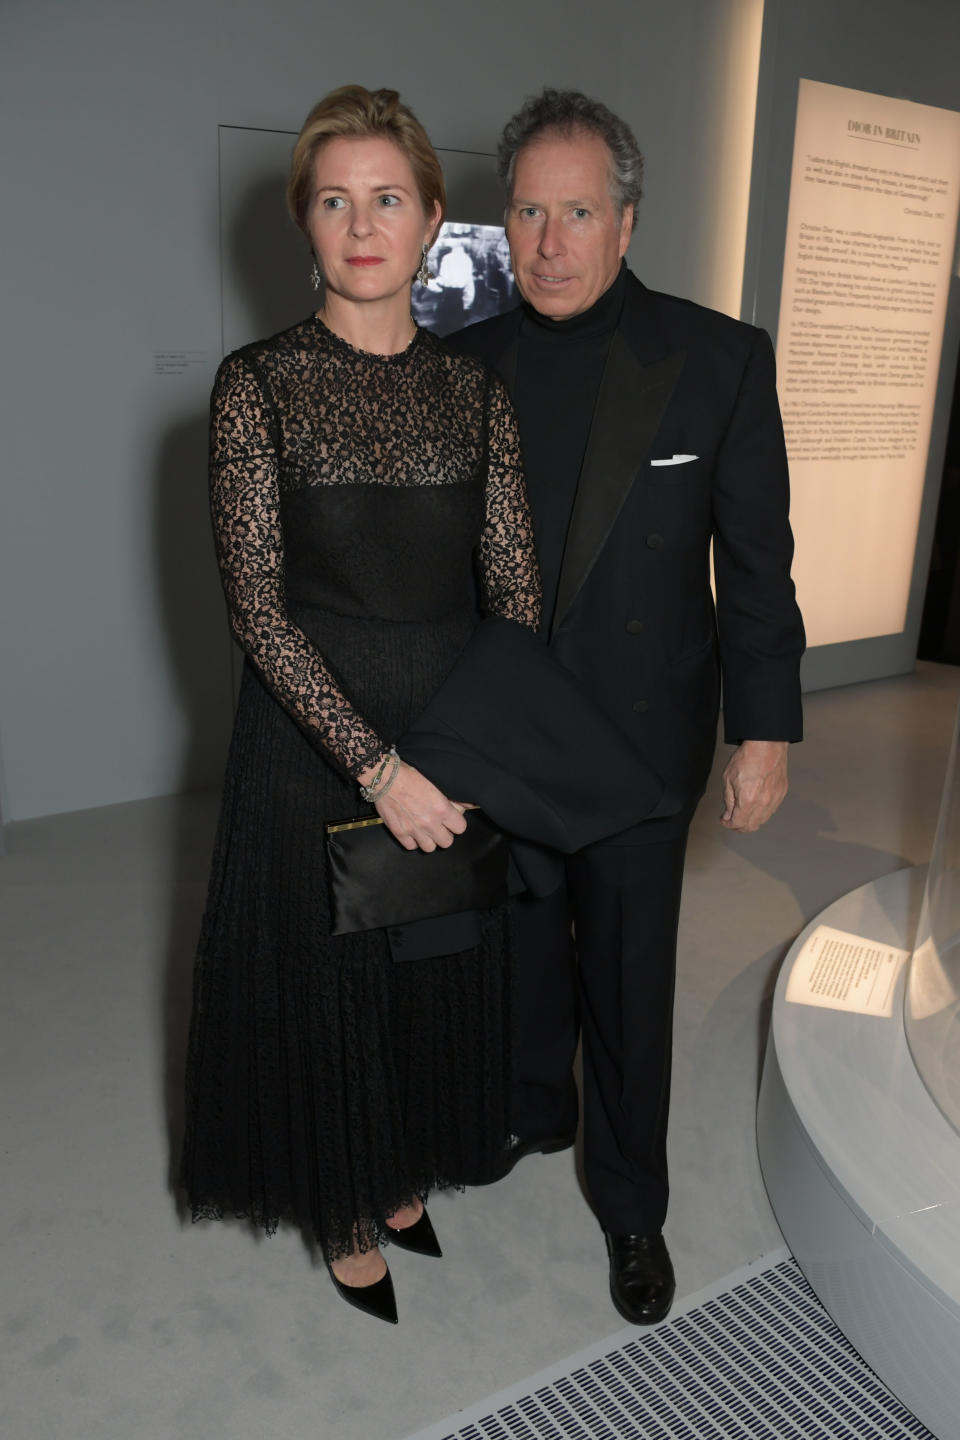 LONDON, ENGLAND - JANUARY 29:  Serena Armstrong-Jones, Countess of Snowdon, and David Armstrong-Jones, 2nd Earl of Snowdon, attend a gala dinner celebrating the opening of the "Christian Dior: Designer of Dreams" exhibition at The V&A on January 29, 2019 in London, England.  (Photo by David M. Benett/Dave Benett/Getty Images for V&A)